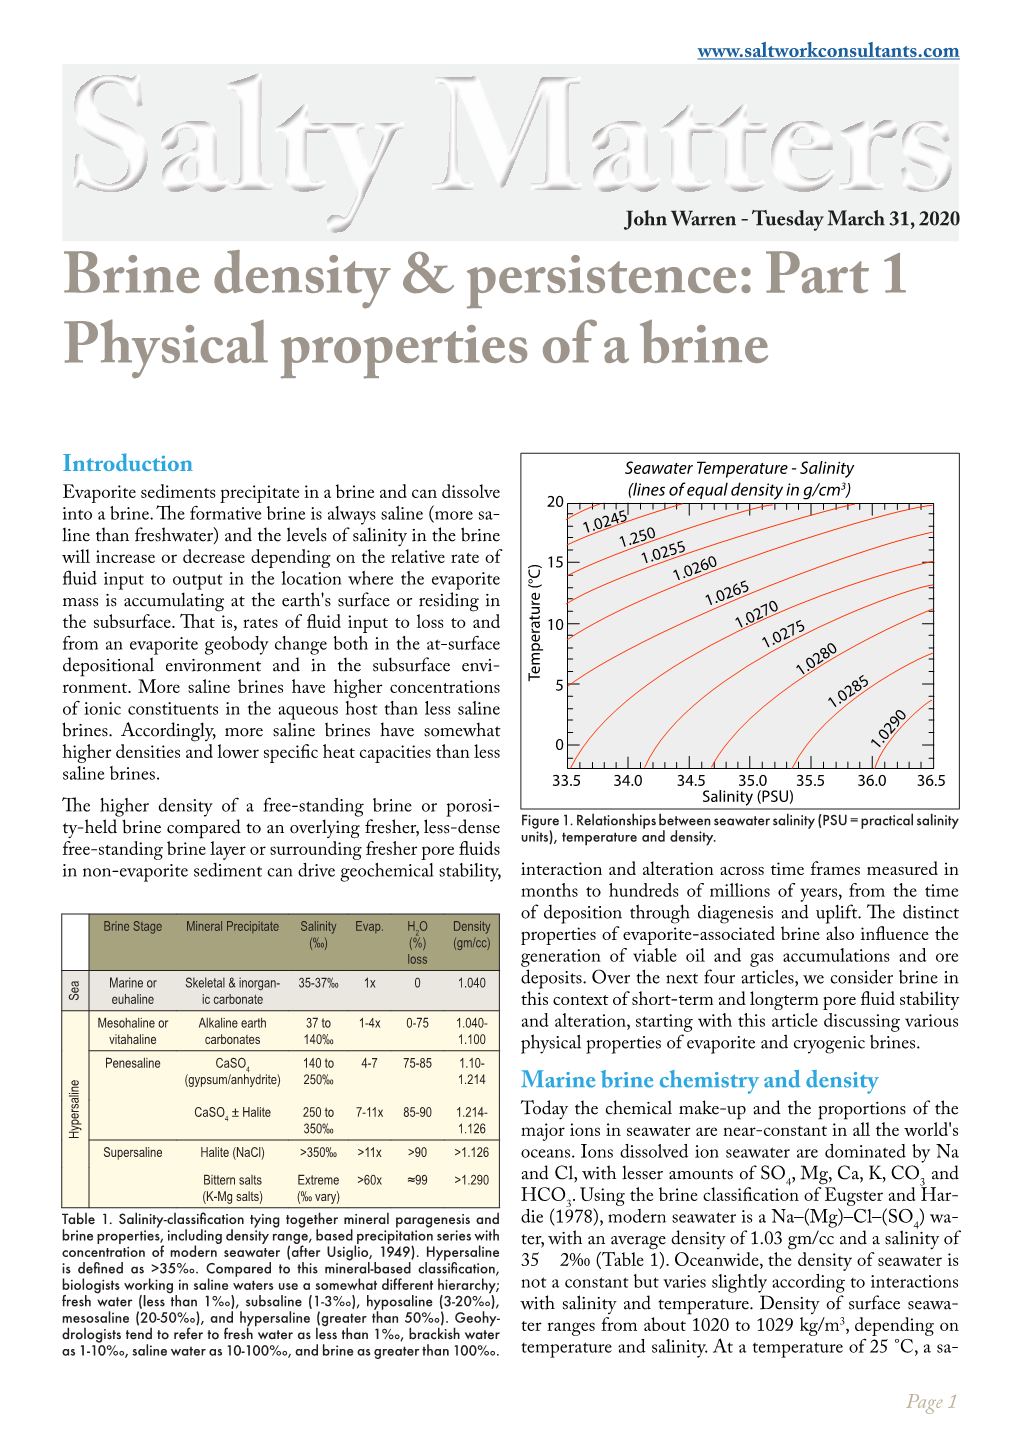 Brine Density & Persistence: Part 1 Physical Properties of a Brine